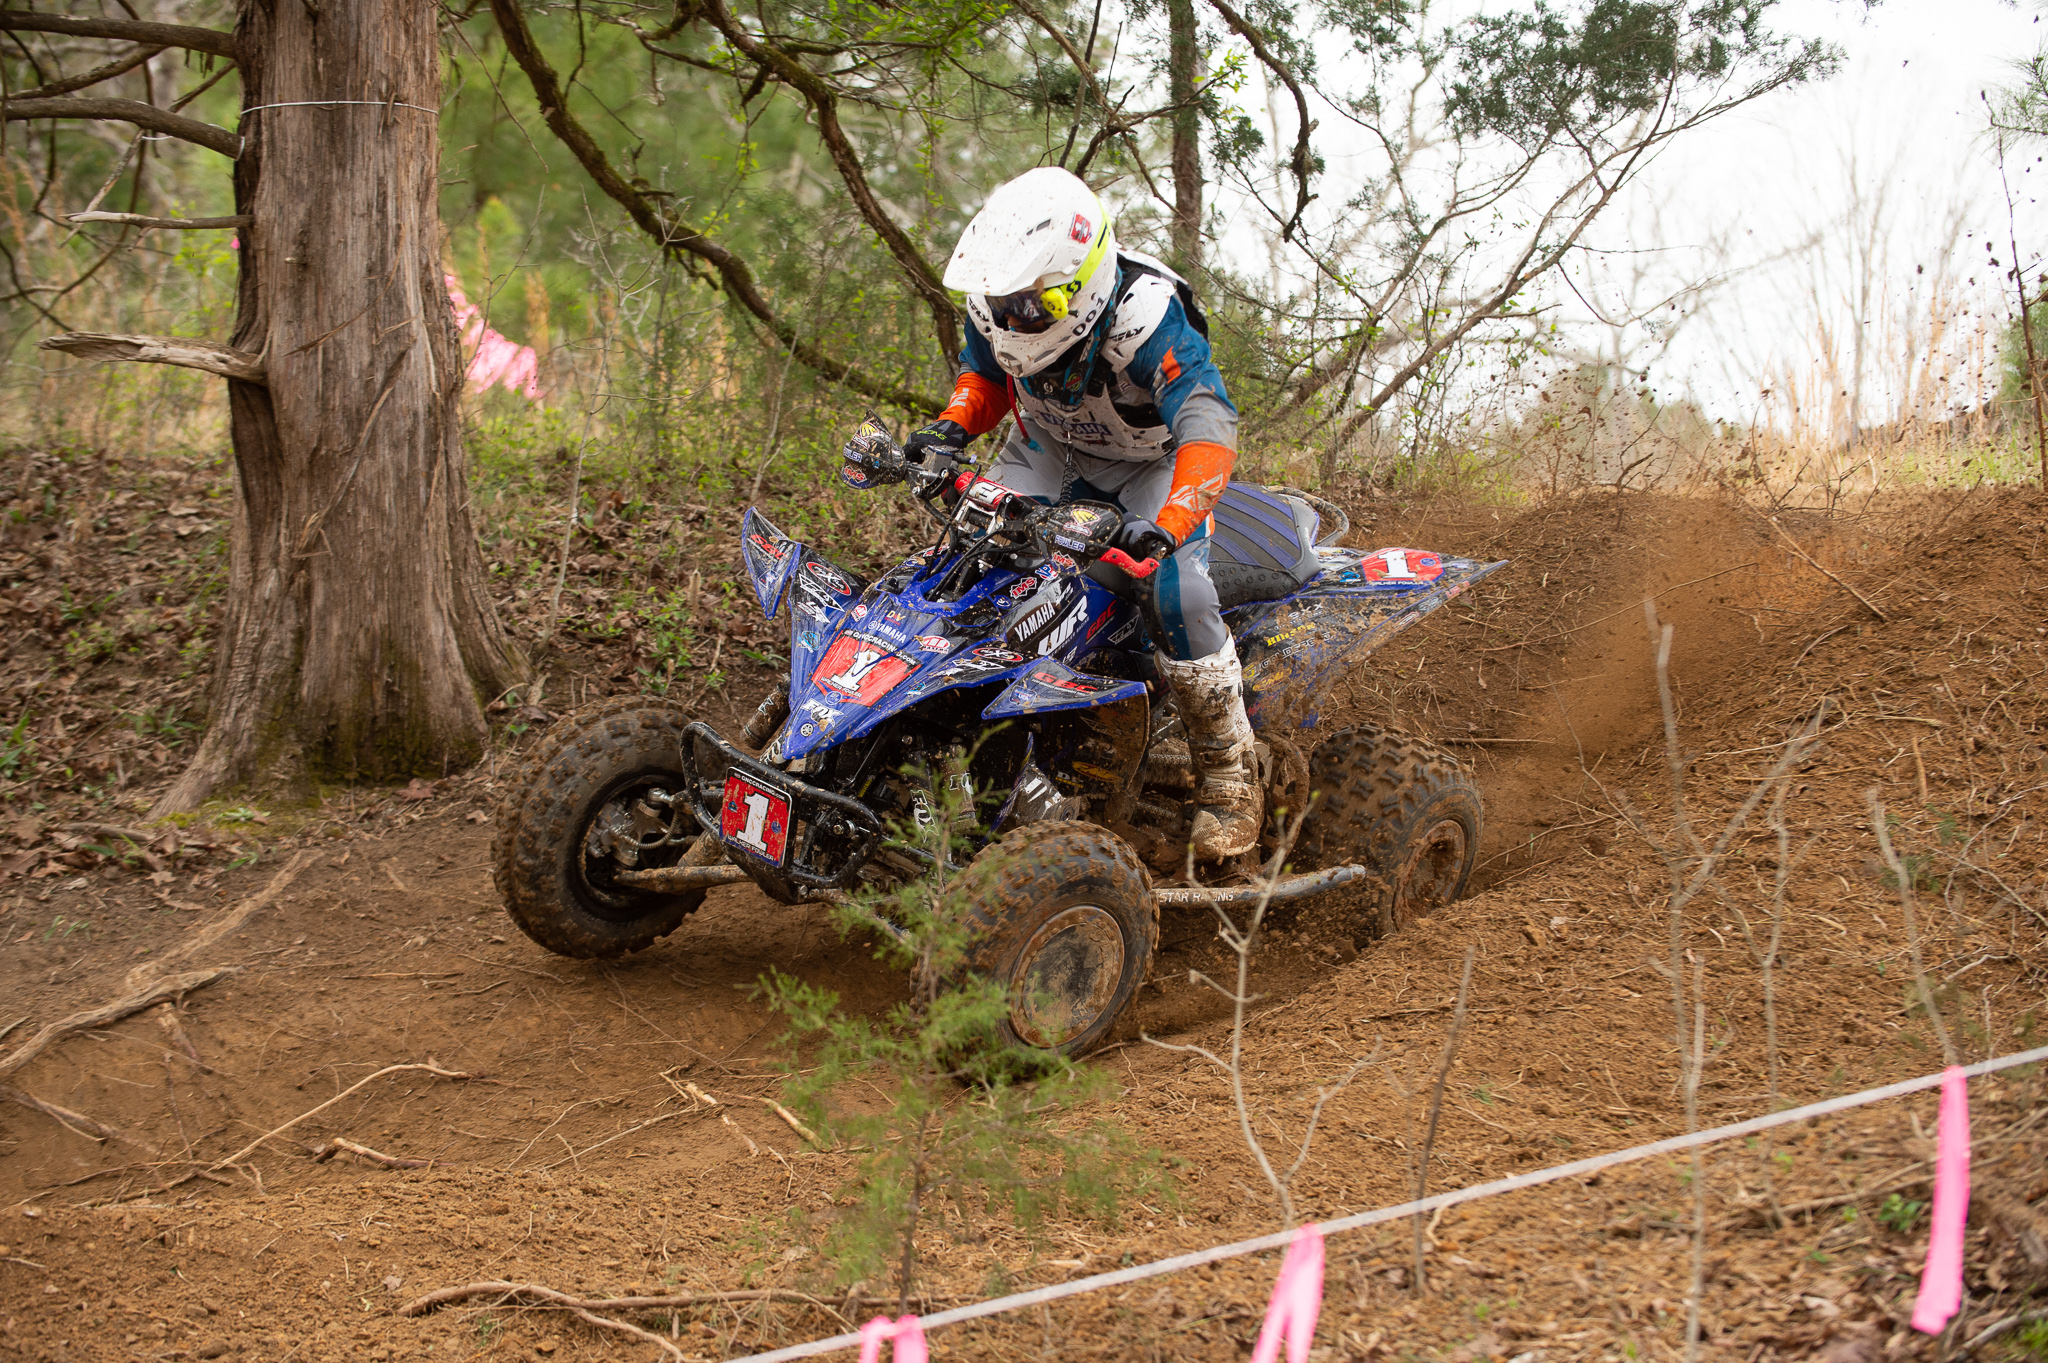 Yamaha ATV and Side-by-Side bLU cRU Racers Starting Strong in 2019 - Walker Fowler GNCC XC1 Pro ATV